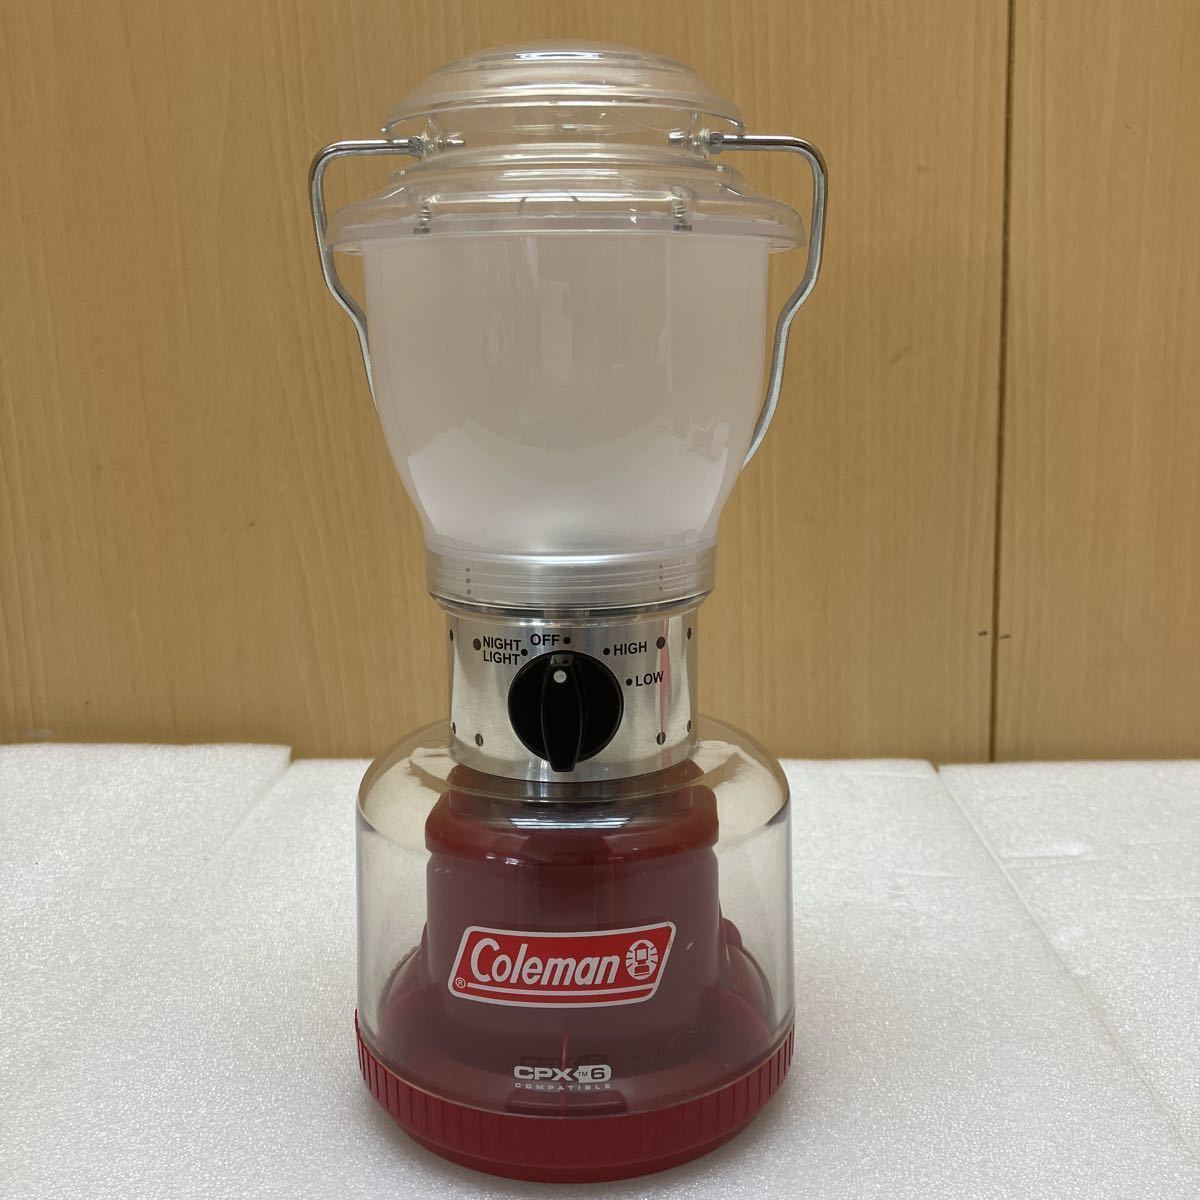 XL6938 コールマン　ランタンColeman CPX-6 Classic Lantern XL Batteries or Rechargeable Camping Hunting RED- 海外